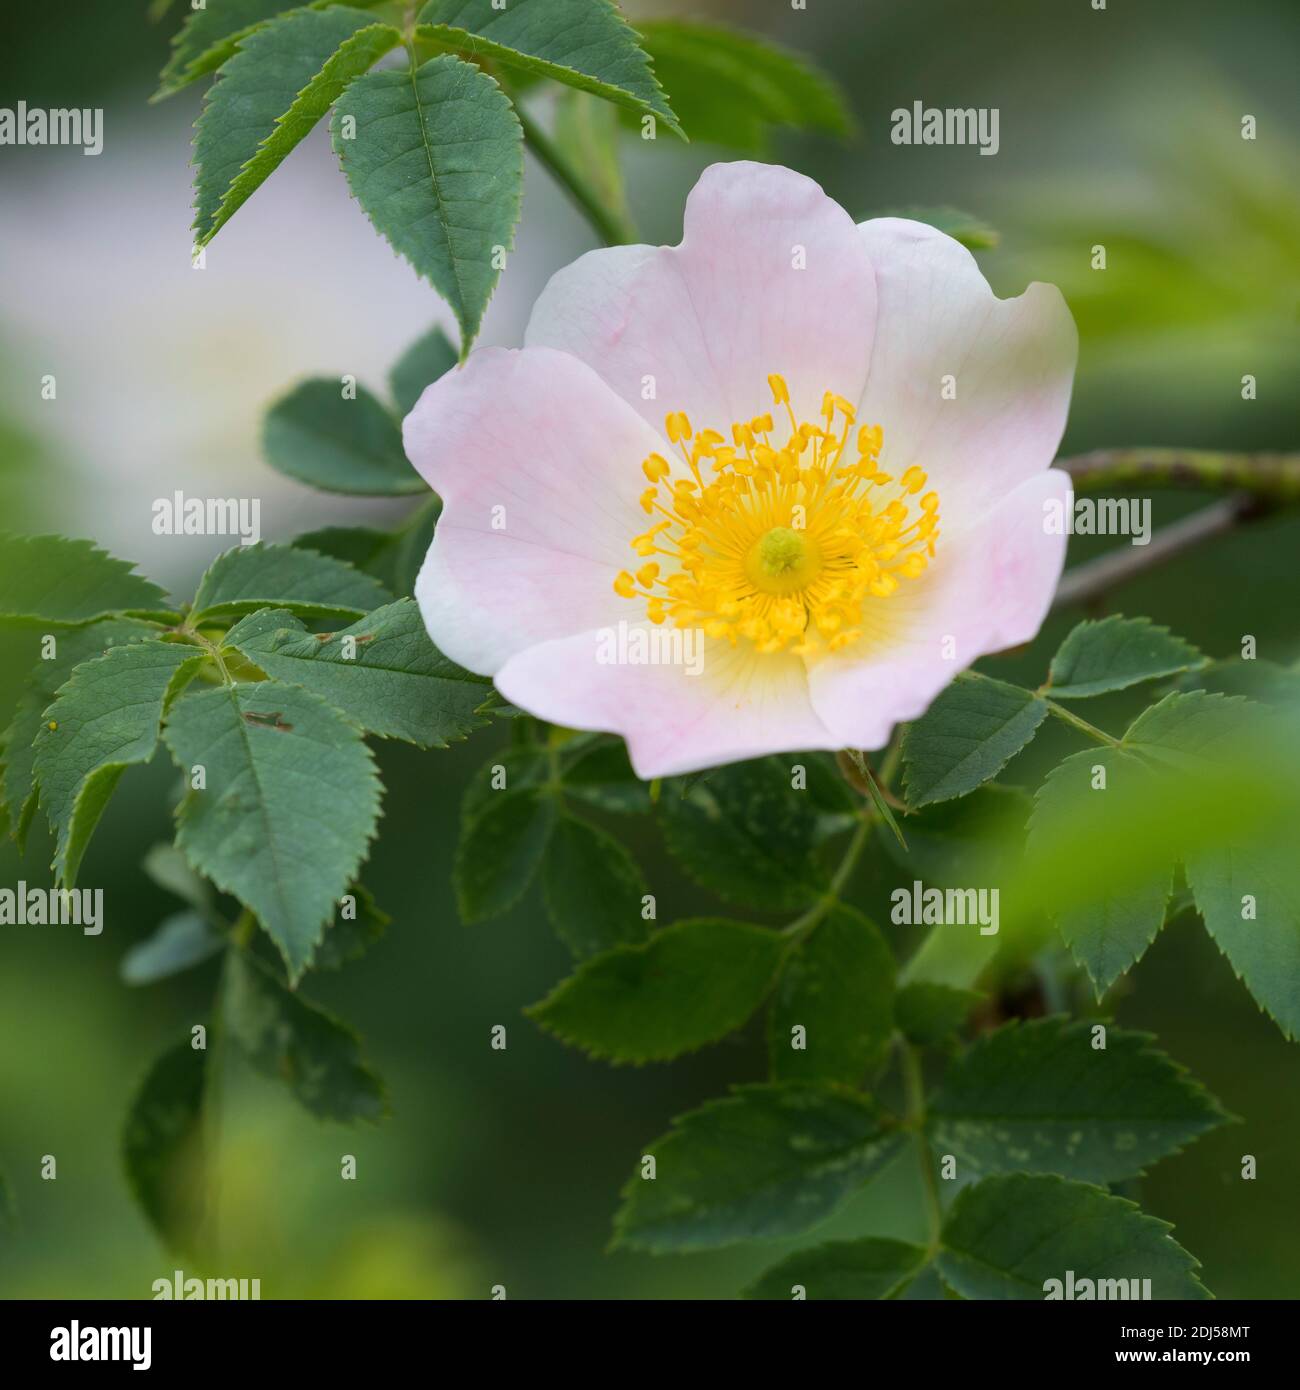 Wildrosen High Resolution Stock Photography and Images - Alamy